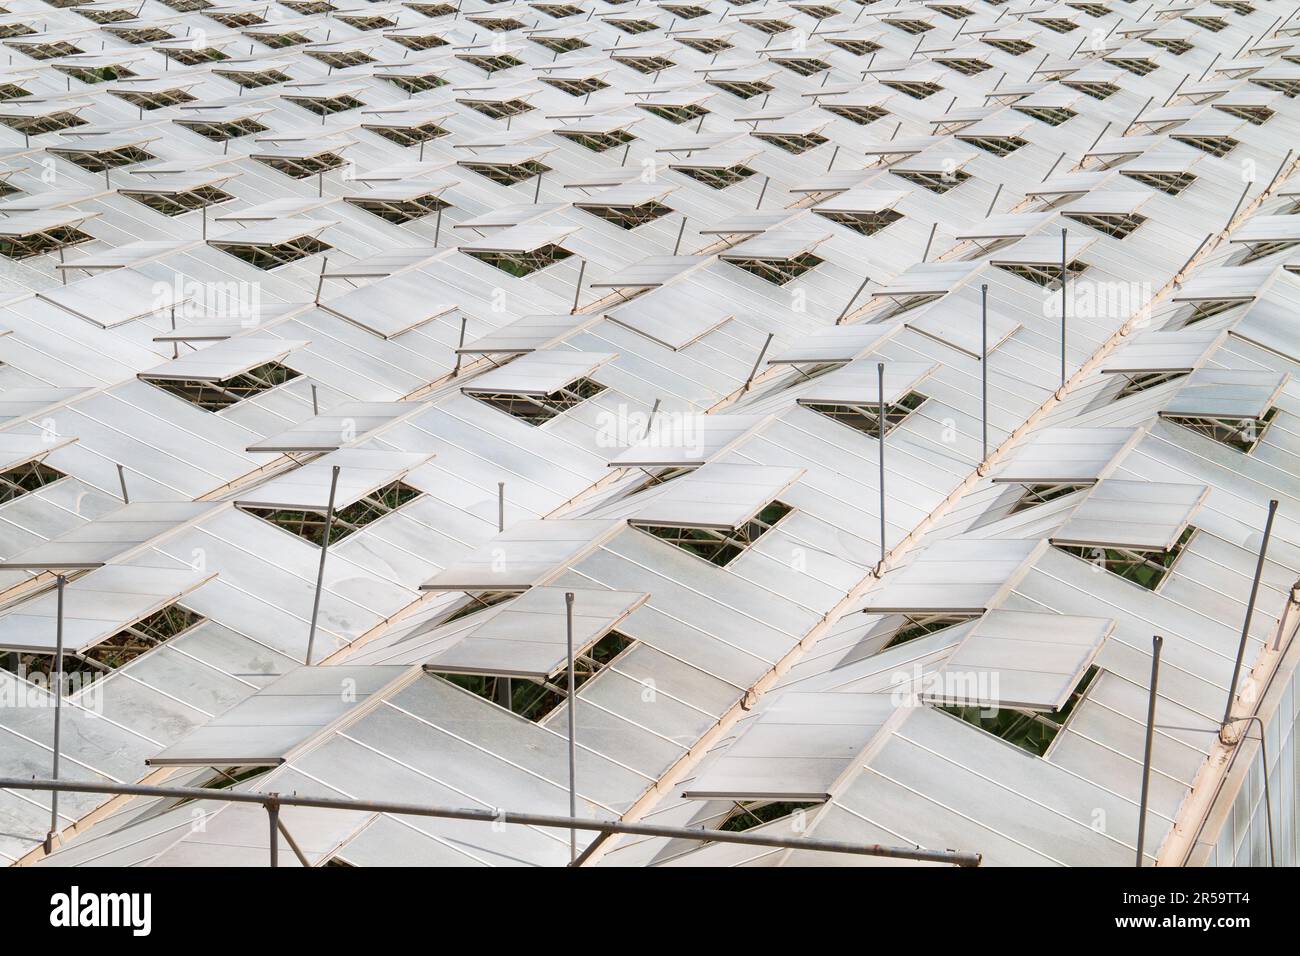 Top view of the roofs of greenhouses with open ventilation windows Stock Photo